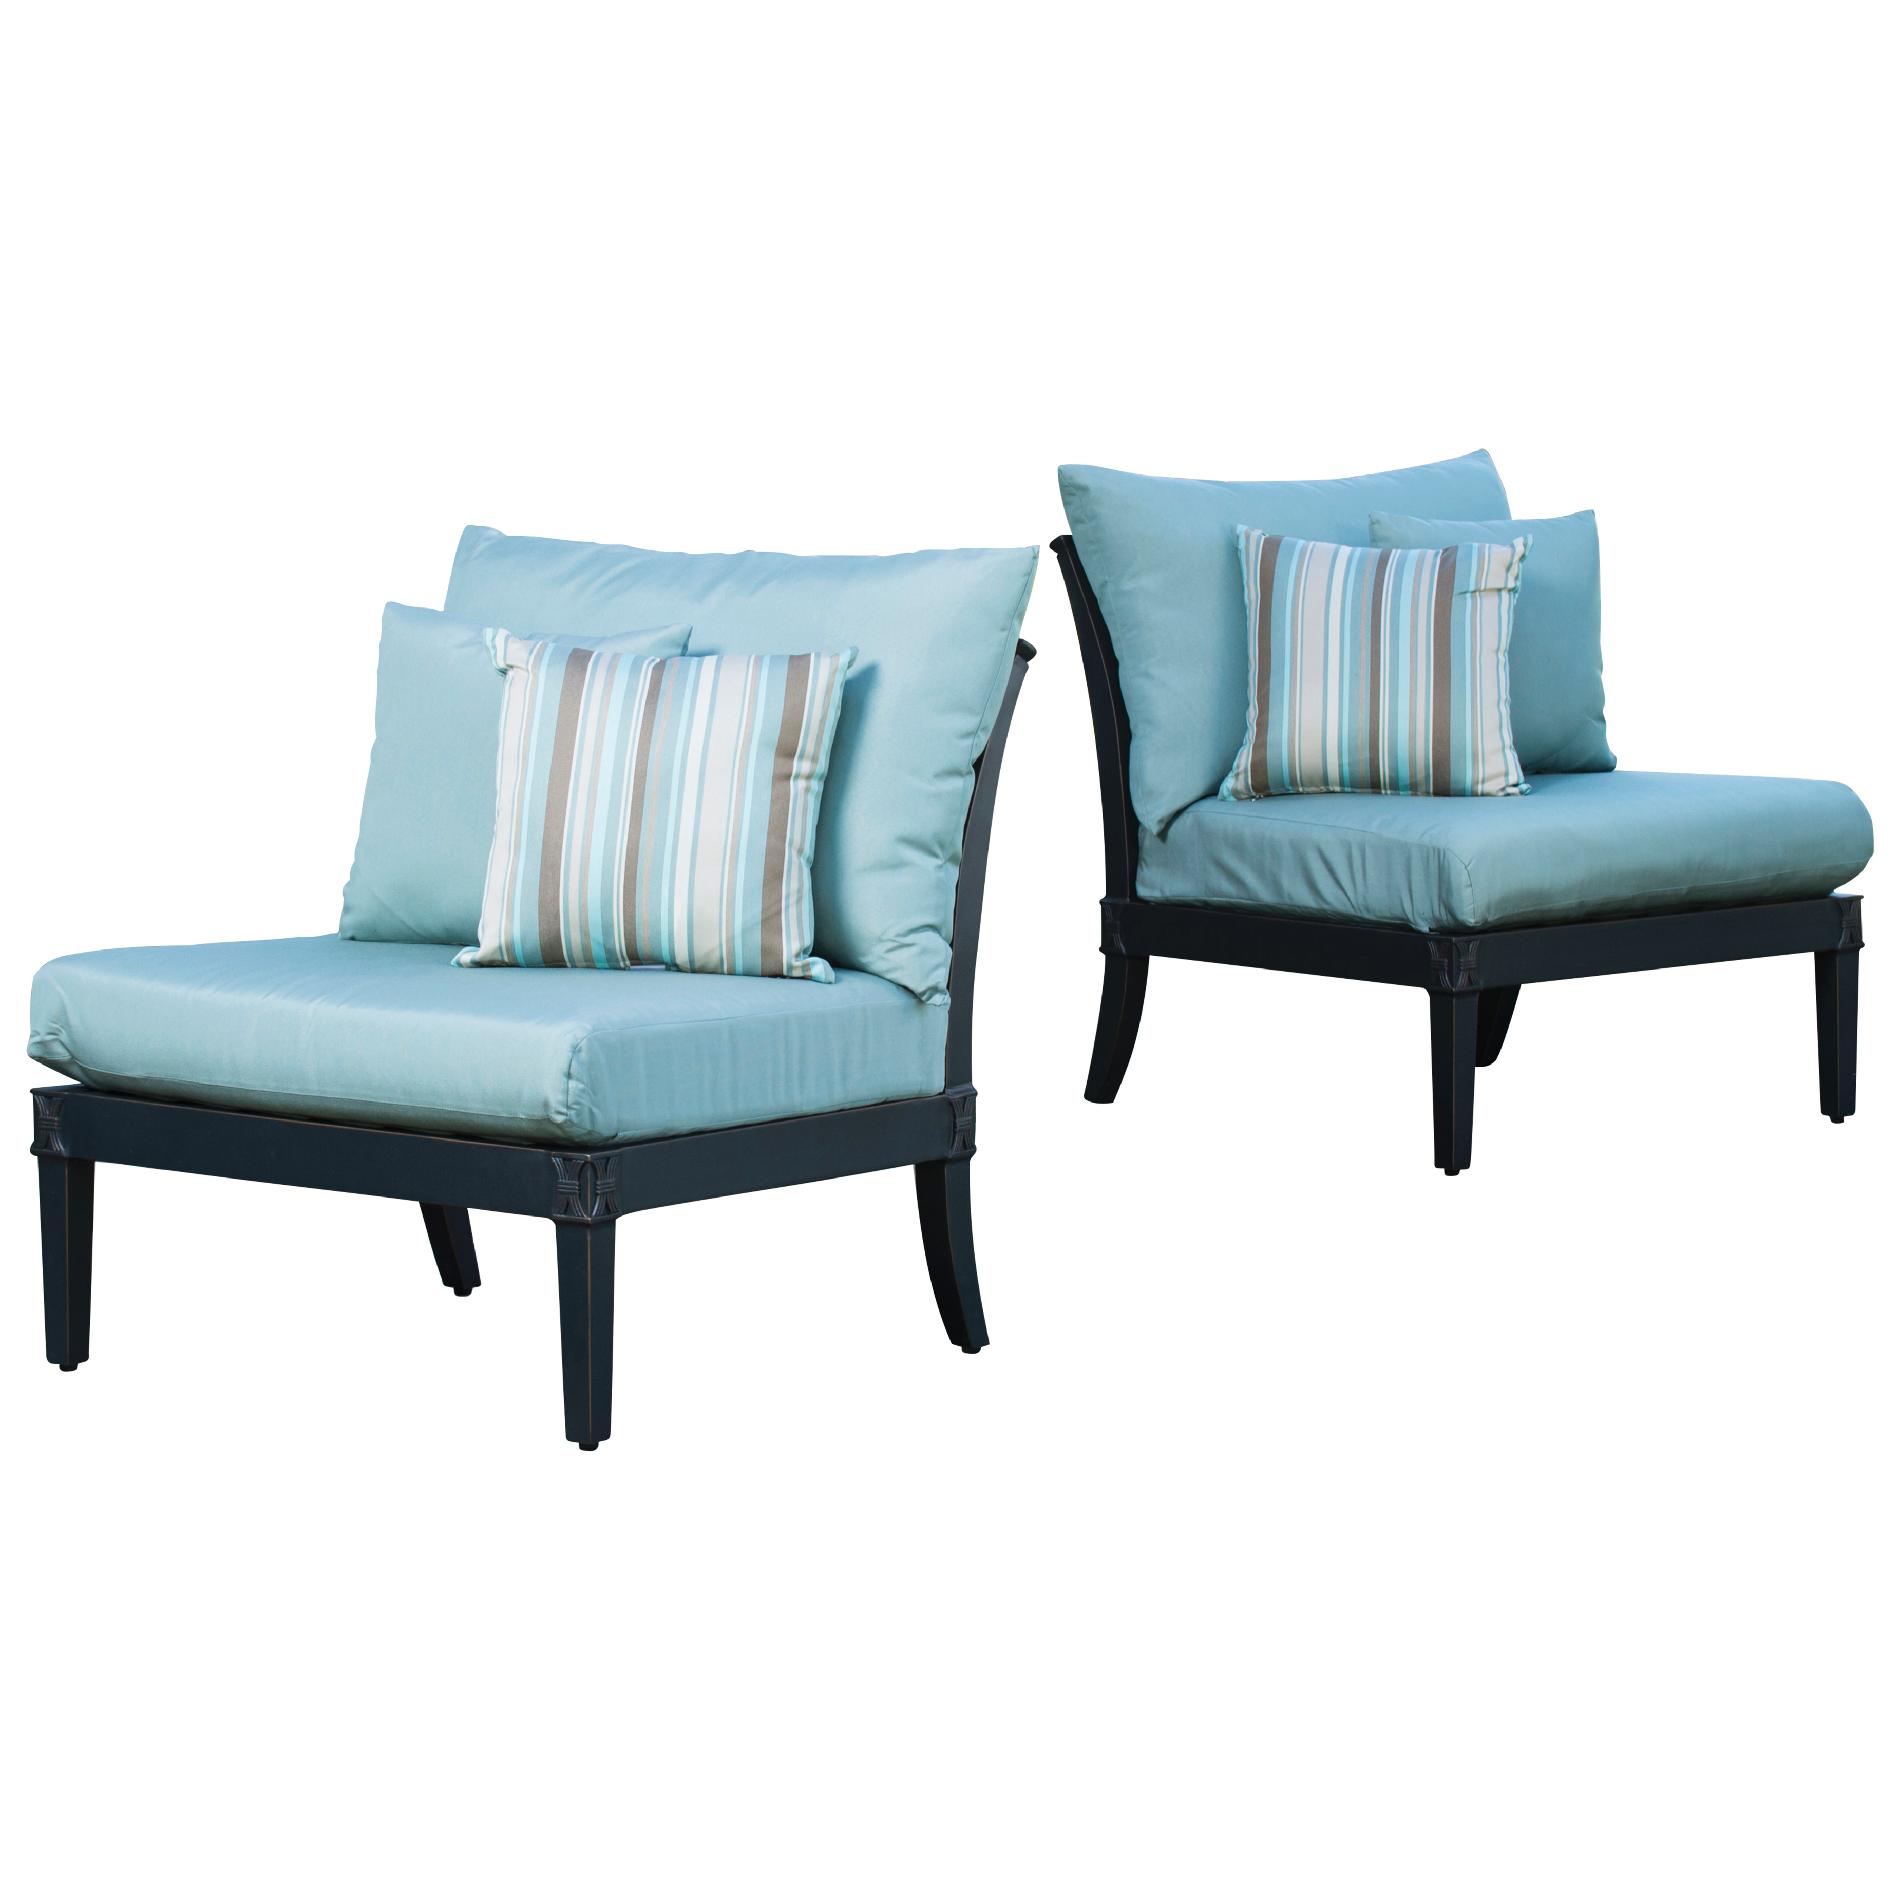 RST Brands Astoria Club Chairs in assorted colors